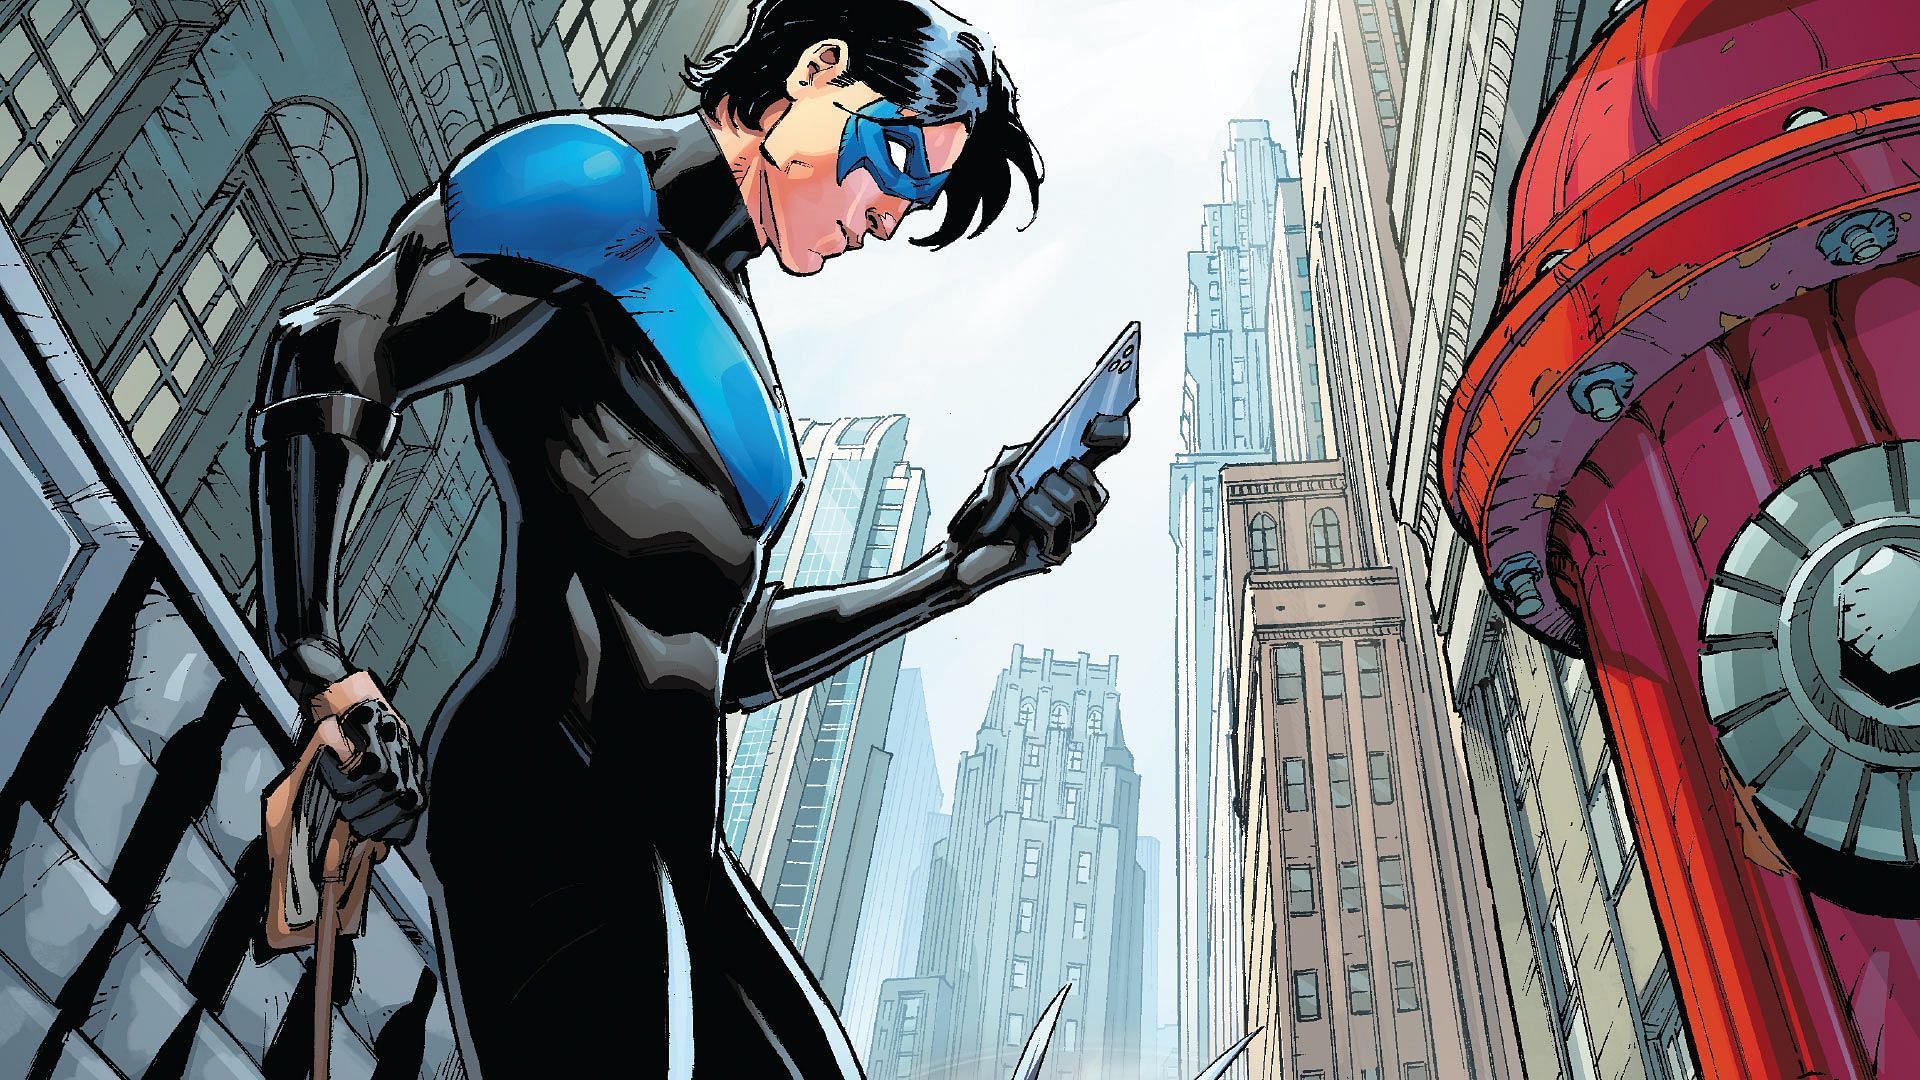 Nightwing: A symbol of courage and hope in the dark streets of Gotham City (Image via DC)